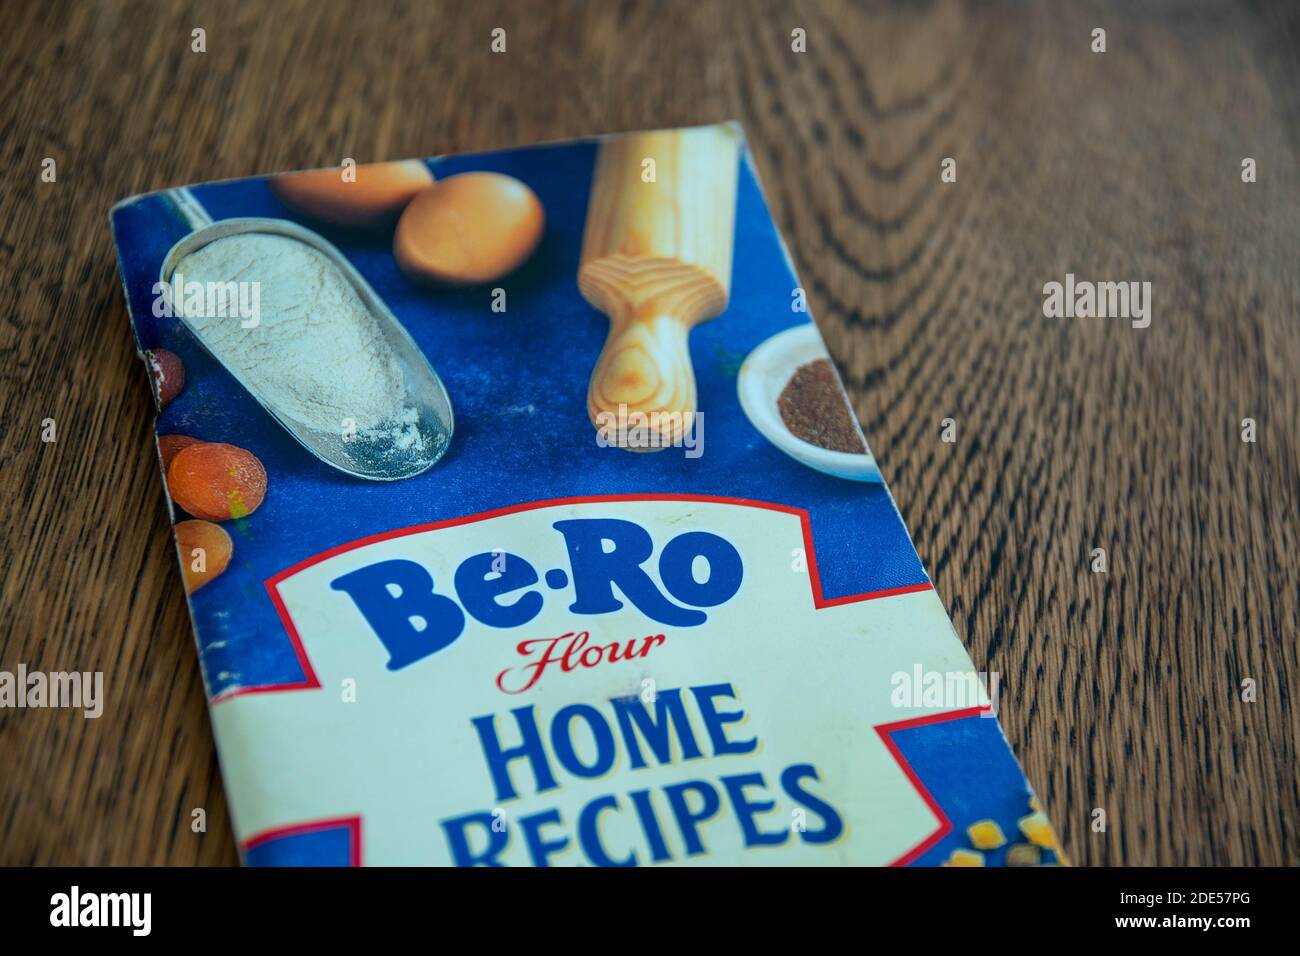 Durham, UK - 28th November 2020: Be-Ro home recipes cookbook. For traditional home baking, recipes include scones, cakes and pastries with easy to fol Stock Photo